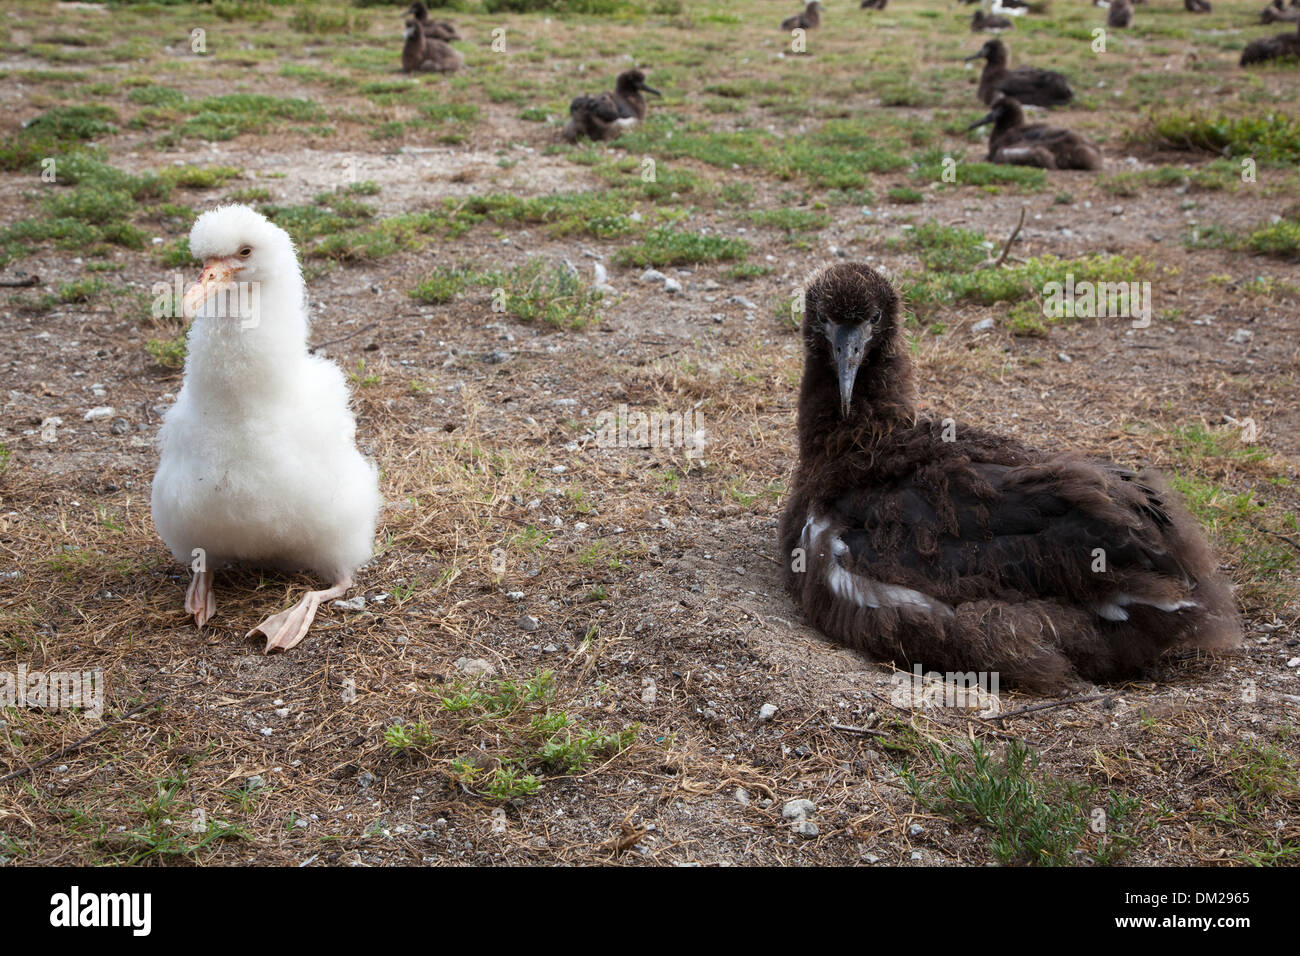 Leucistic white Laysan Albatross chick (Phoebastria immutabilis) beside chick with normal brown pigmentation on nest in a North Pacific nesting colony Stock Photo